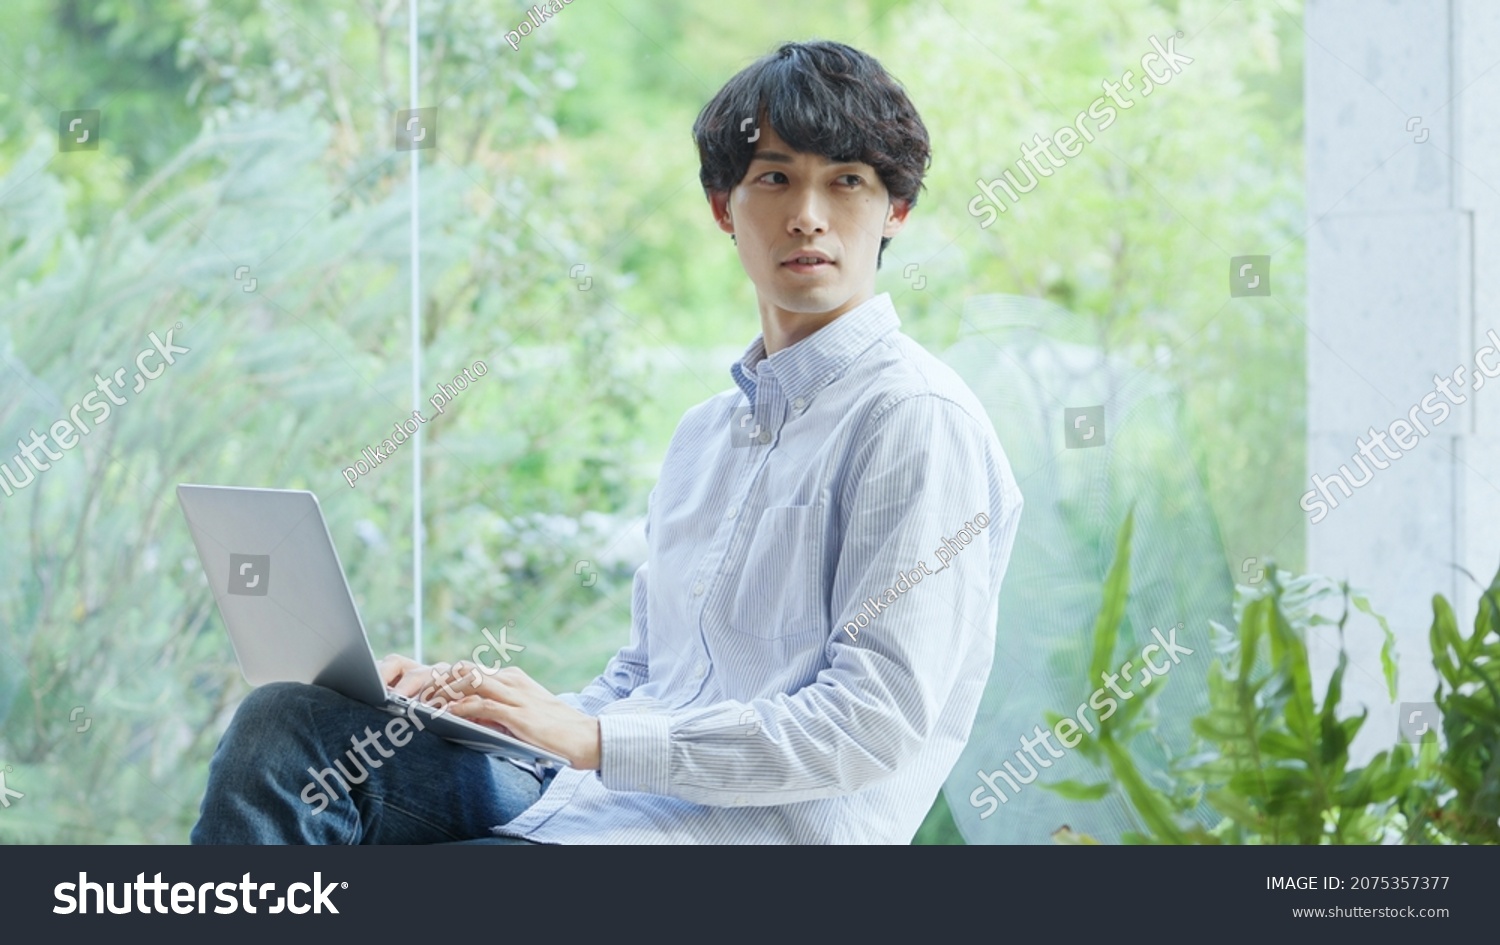 Asian young man working with a computer #2075357377